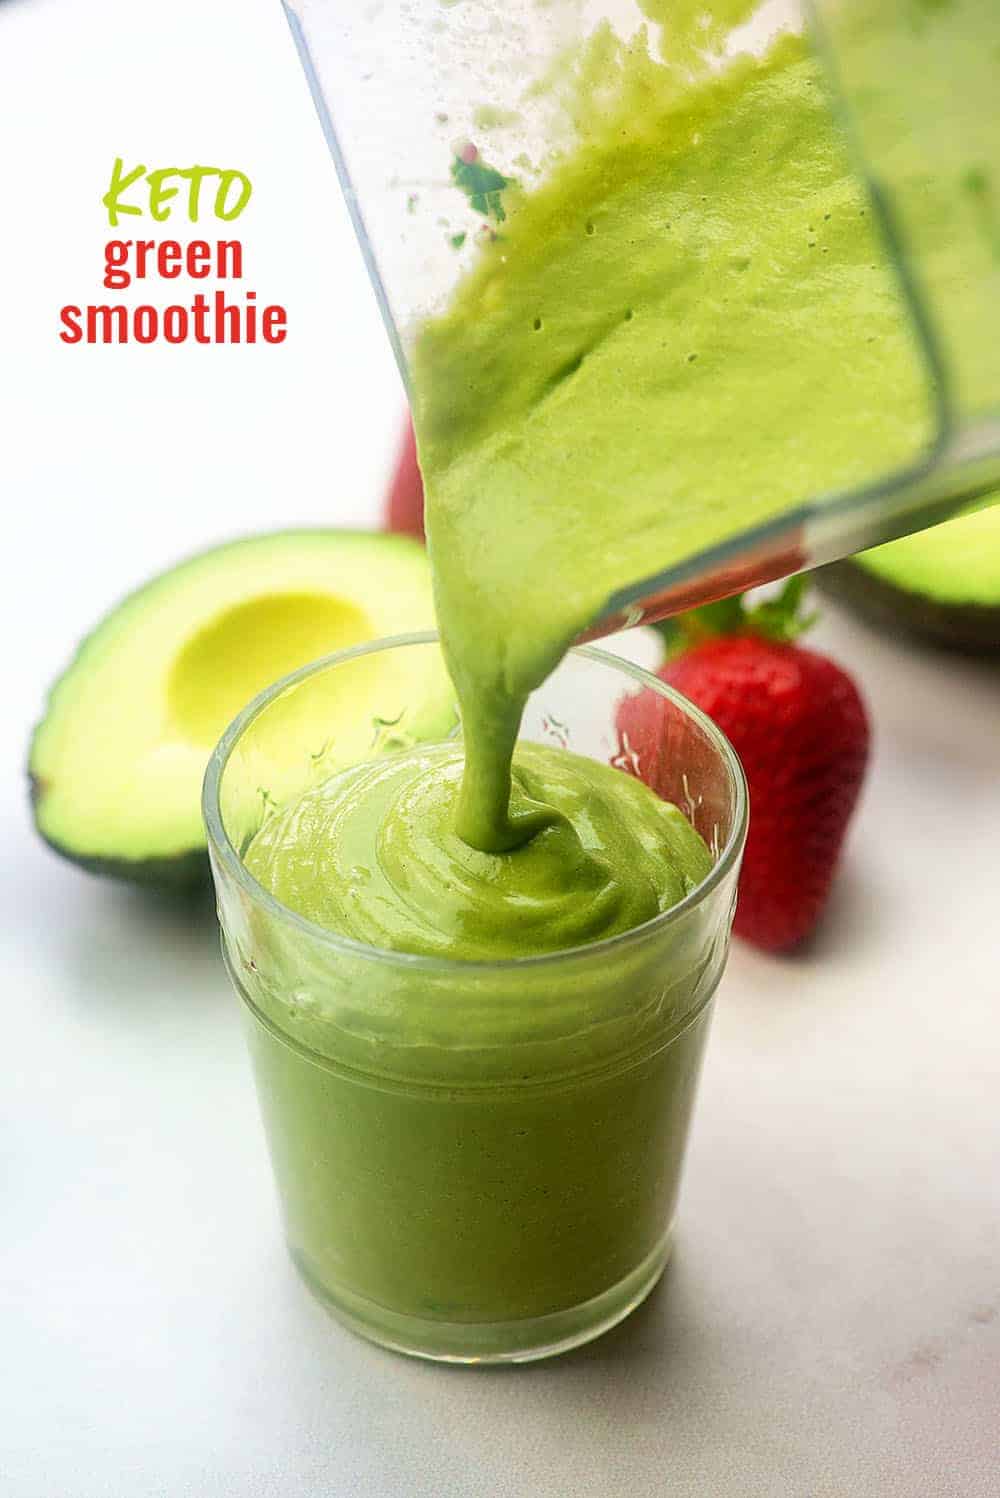 Pouring green smoothie from the blender into a glass